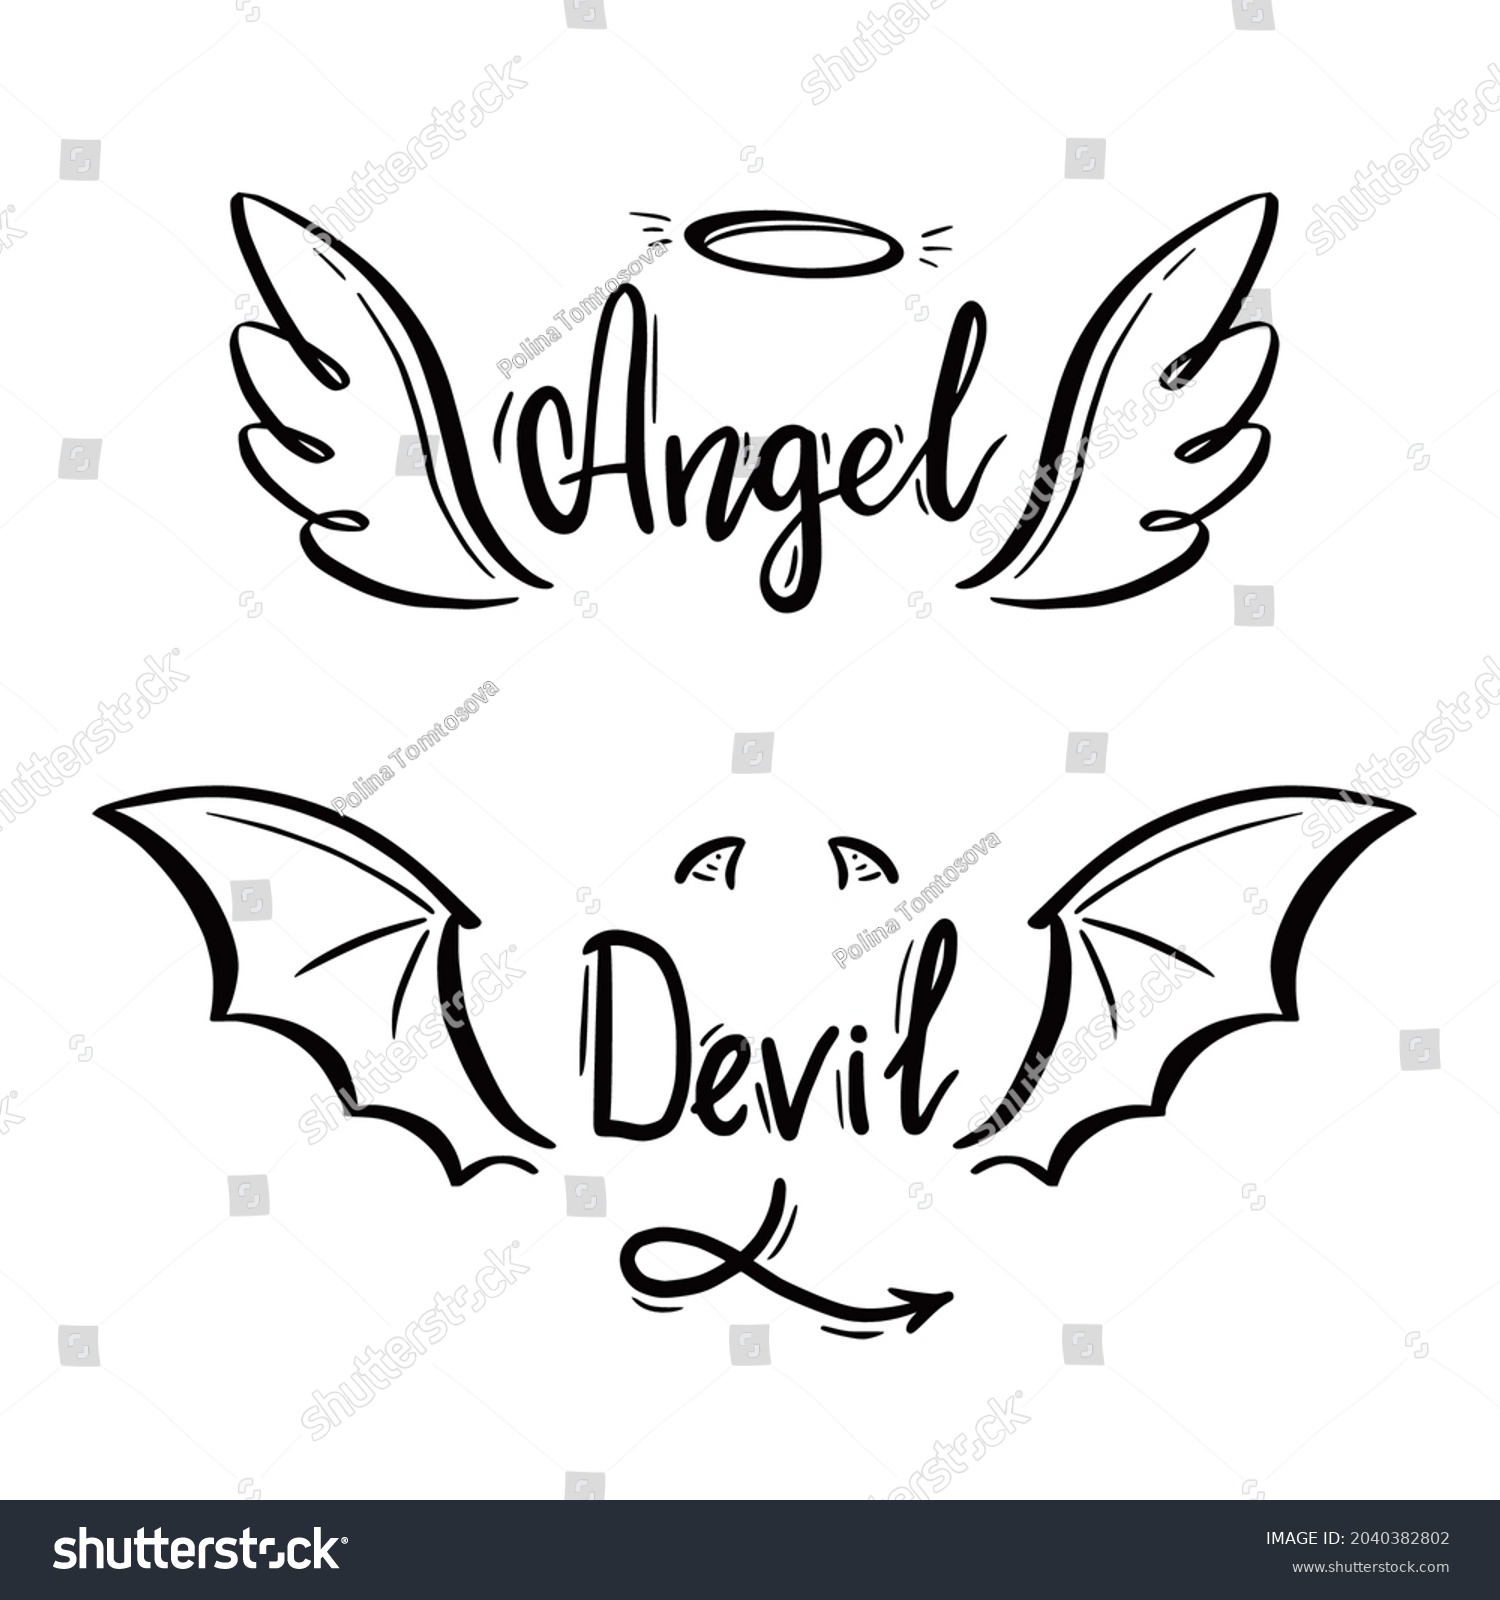 SVG of Angel and devil stylized vector illustration. Angel with wing, halo. Devil with wing and tail. Hand drawn line sketch style. svg